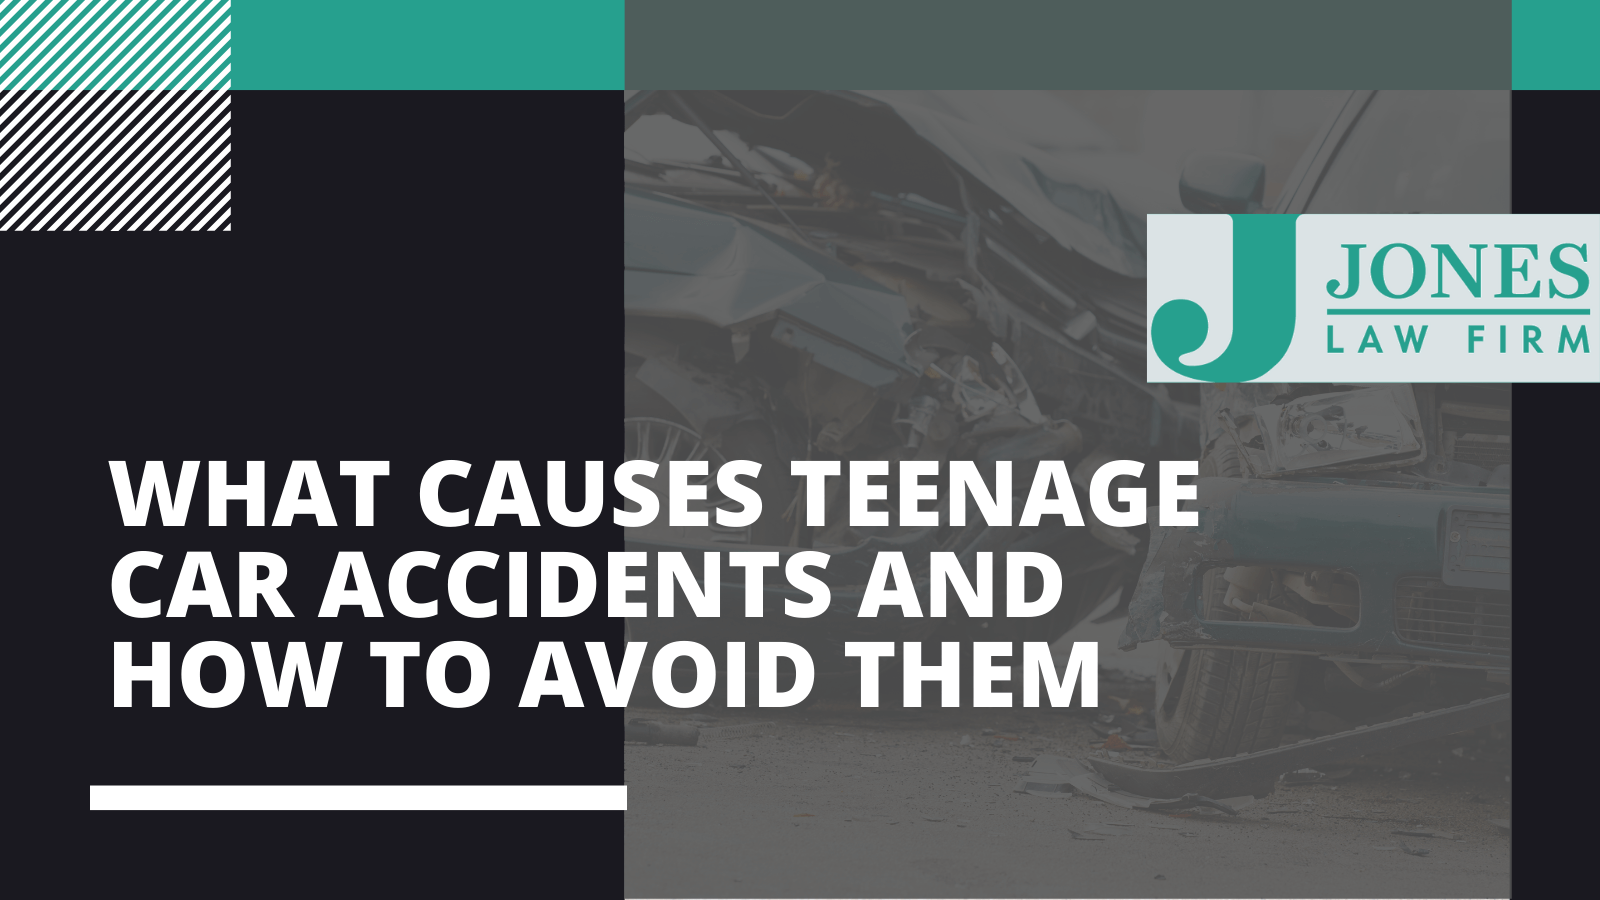 What Causes Teenage Car Accidents And How To Avoid Them - Jones law firm - Alexandria louisiana